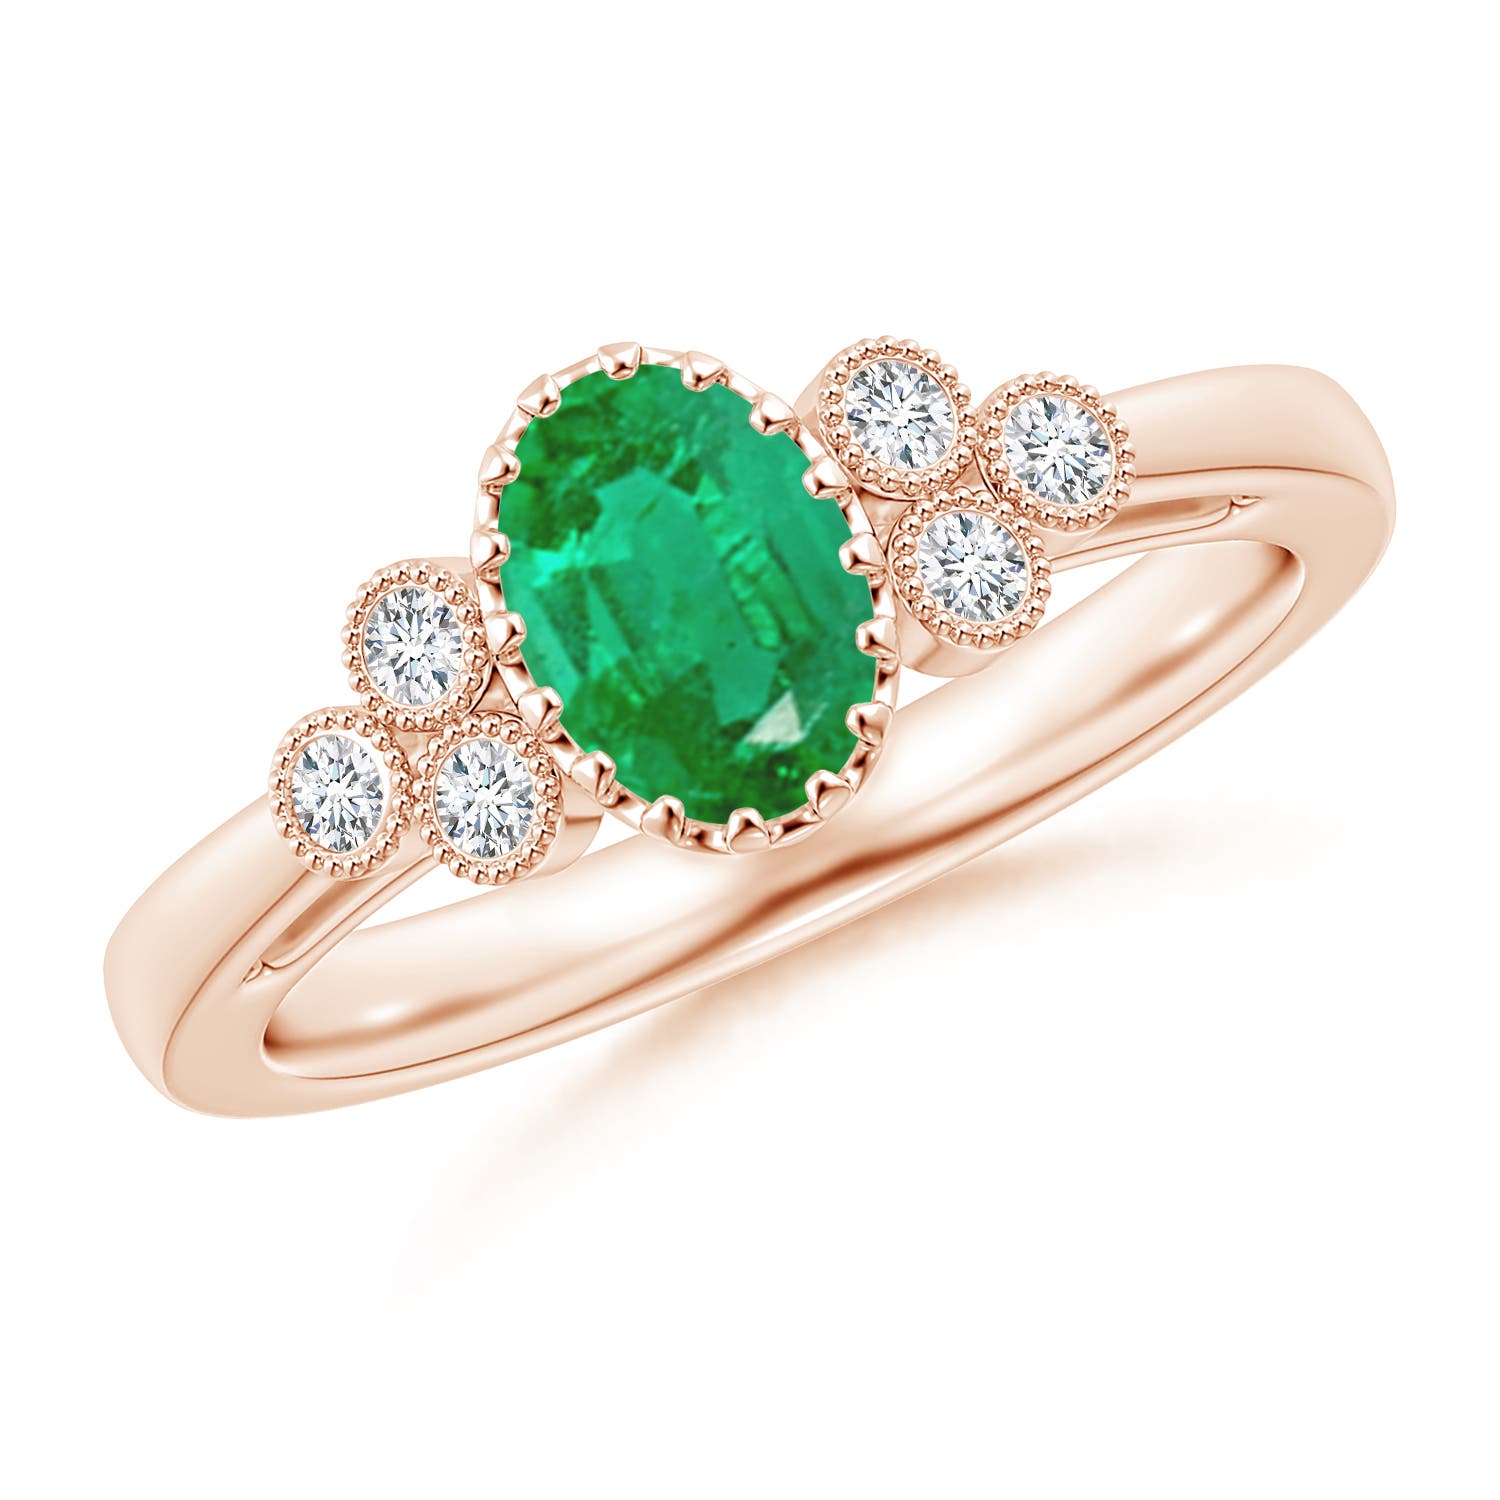 AA - Emerald / 0.8 CT / 14 KT Rose Gold